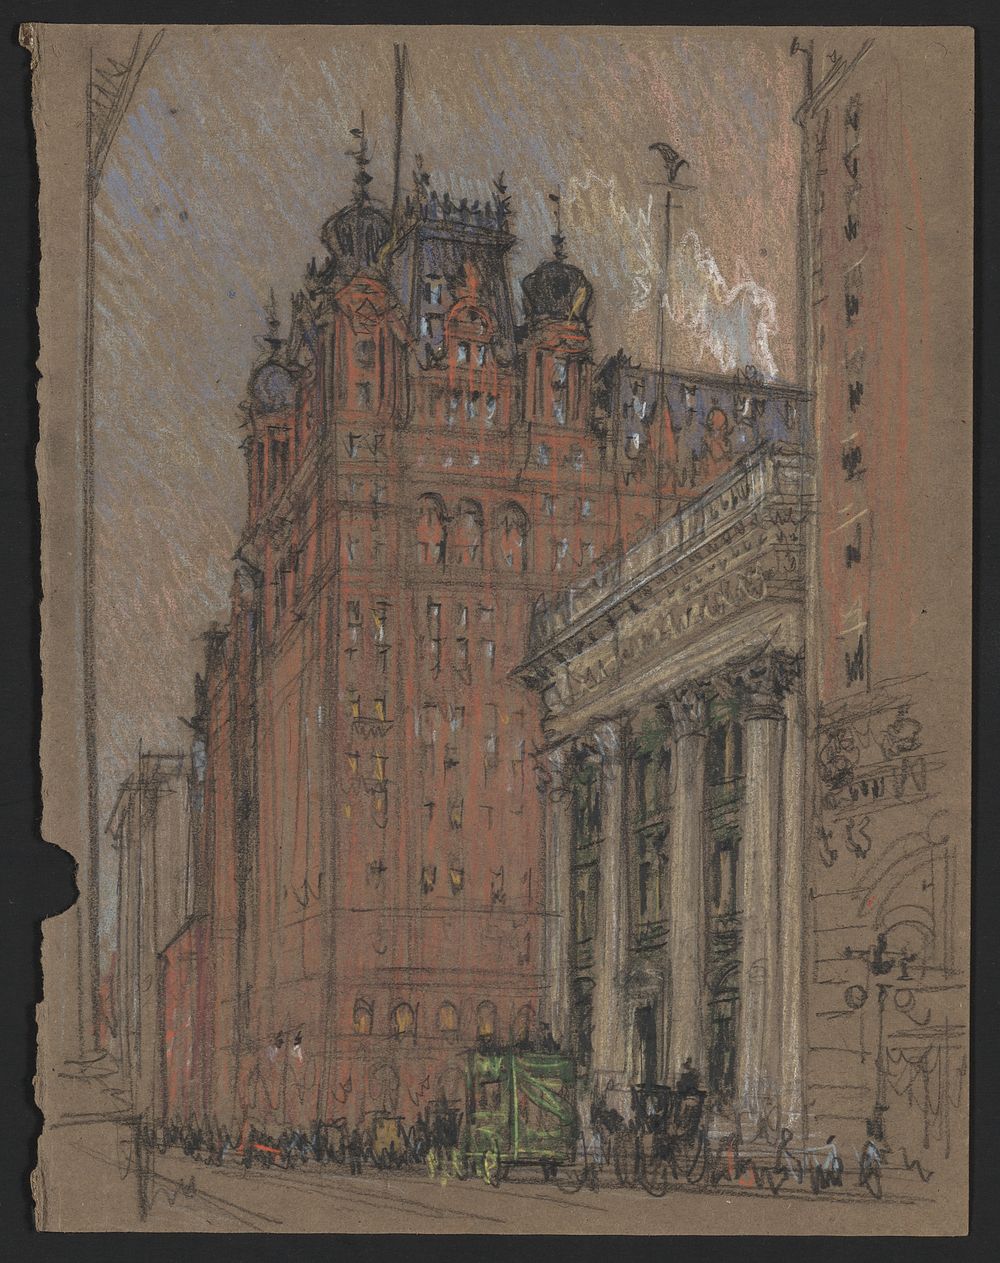 Waldorf Astoria Hotel, Thirty-Fourth Street and Fifth Avenue (between ca. 1904 and 1908) drawing in high resolution by…